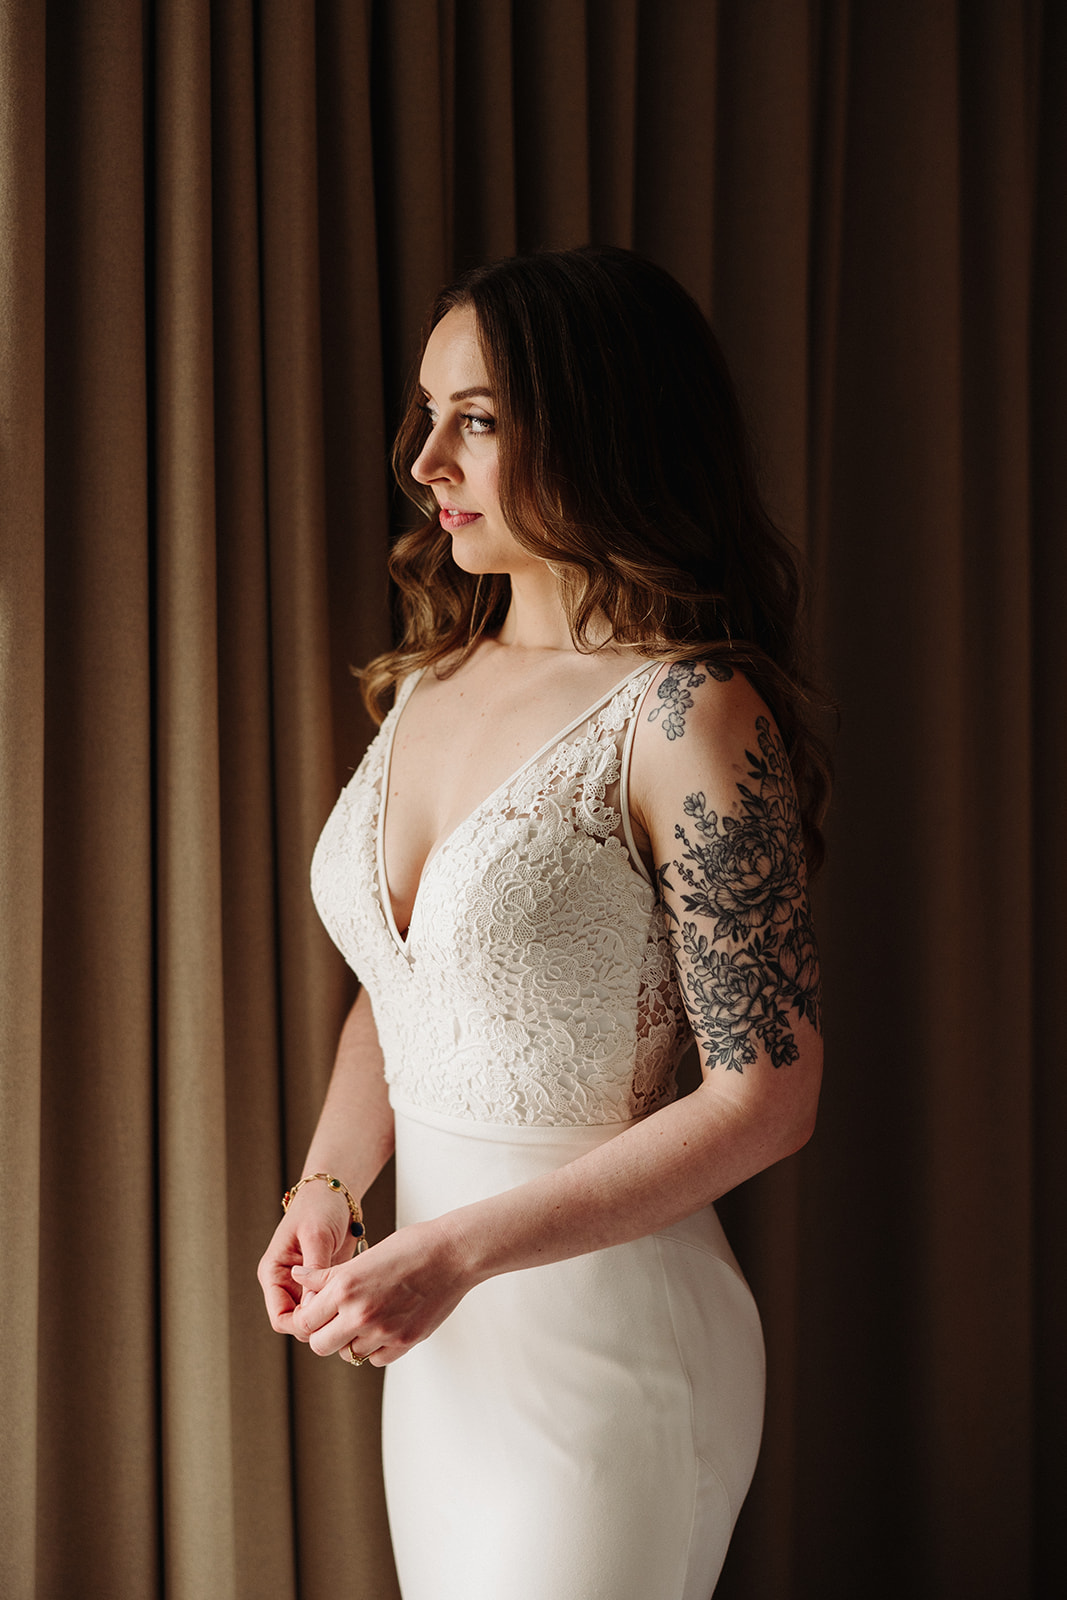 Woman looking out of a window wearing a lace bodice, mermaid wedding dress